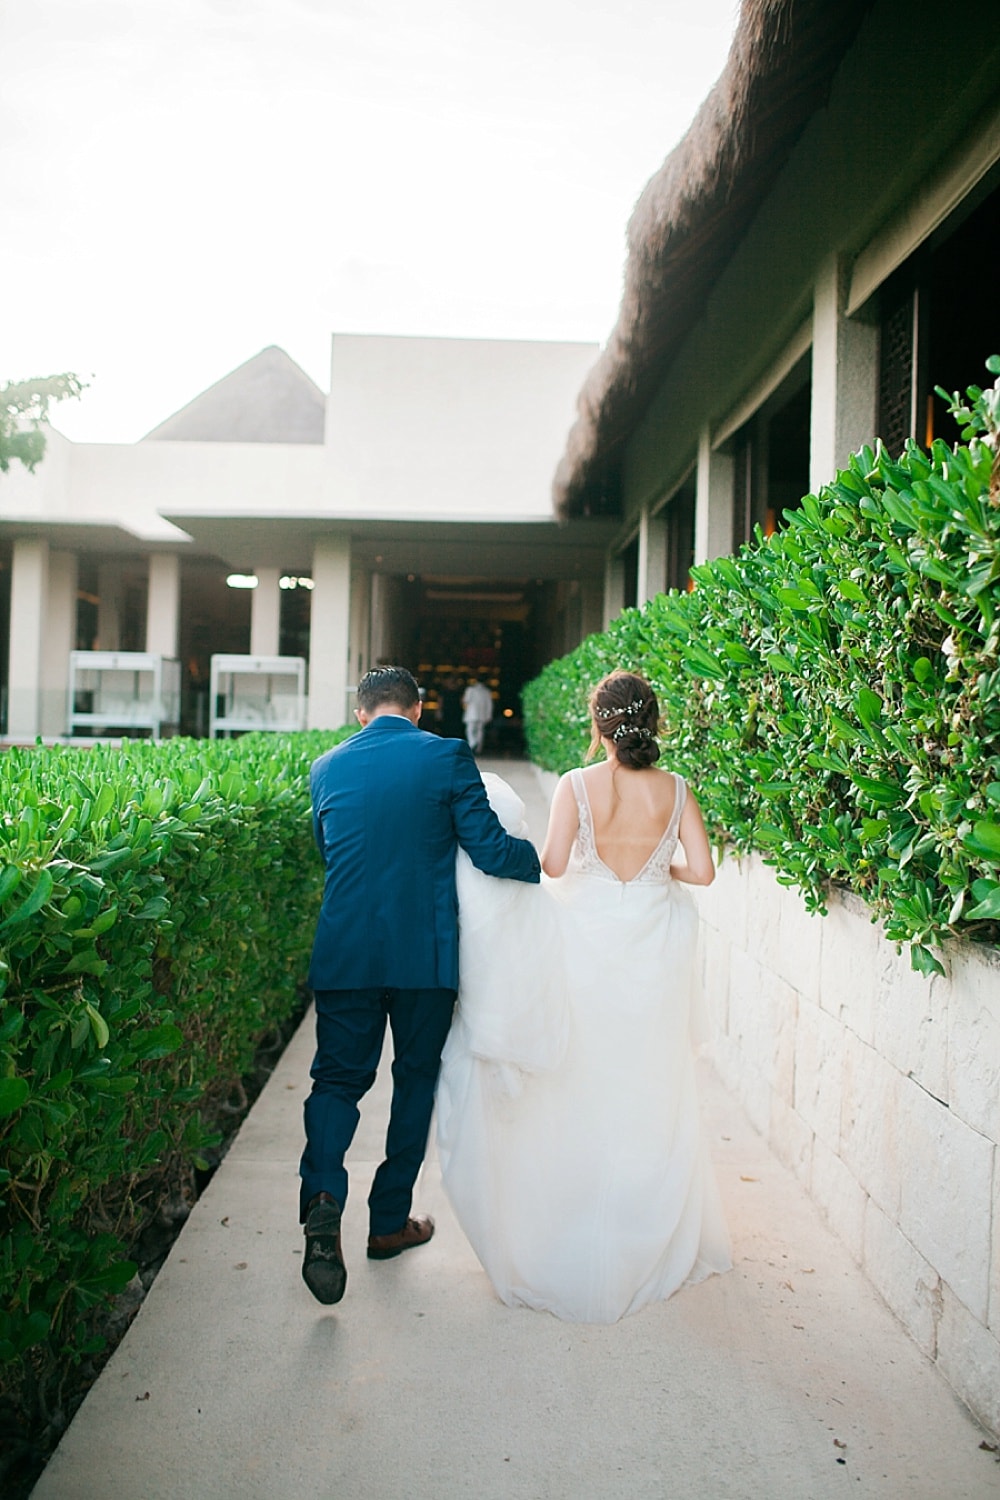 A Simple Wedding in Mexico on Cottage Hill24.jpg